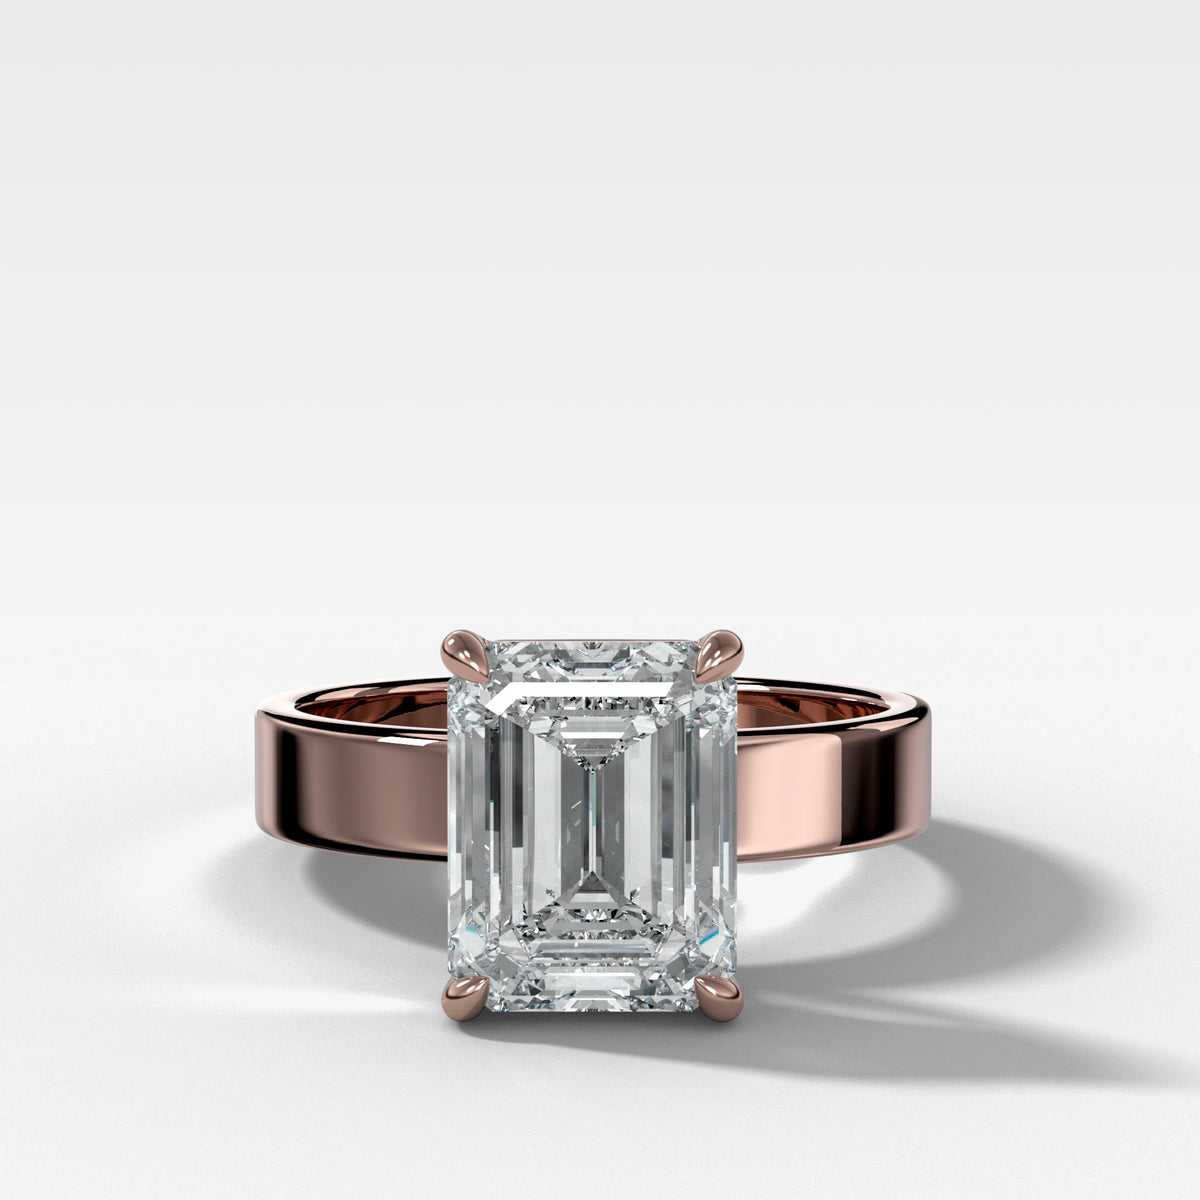 Finest Solitaire Engagement Ring With Emerald Cut Diamond